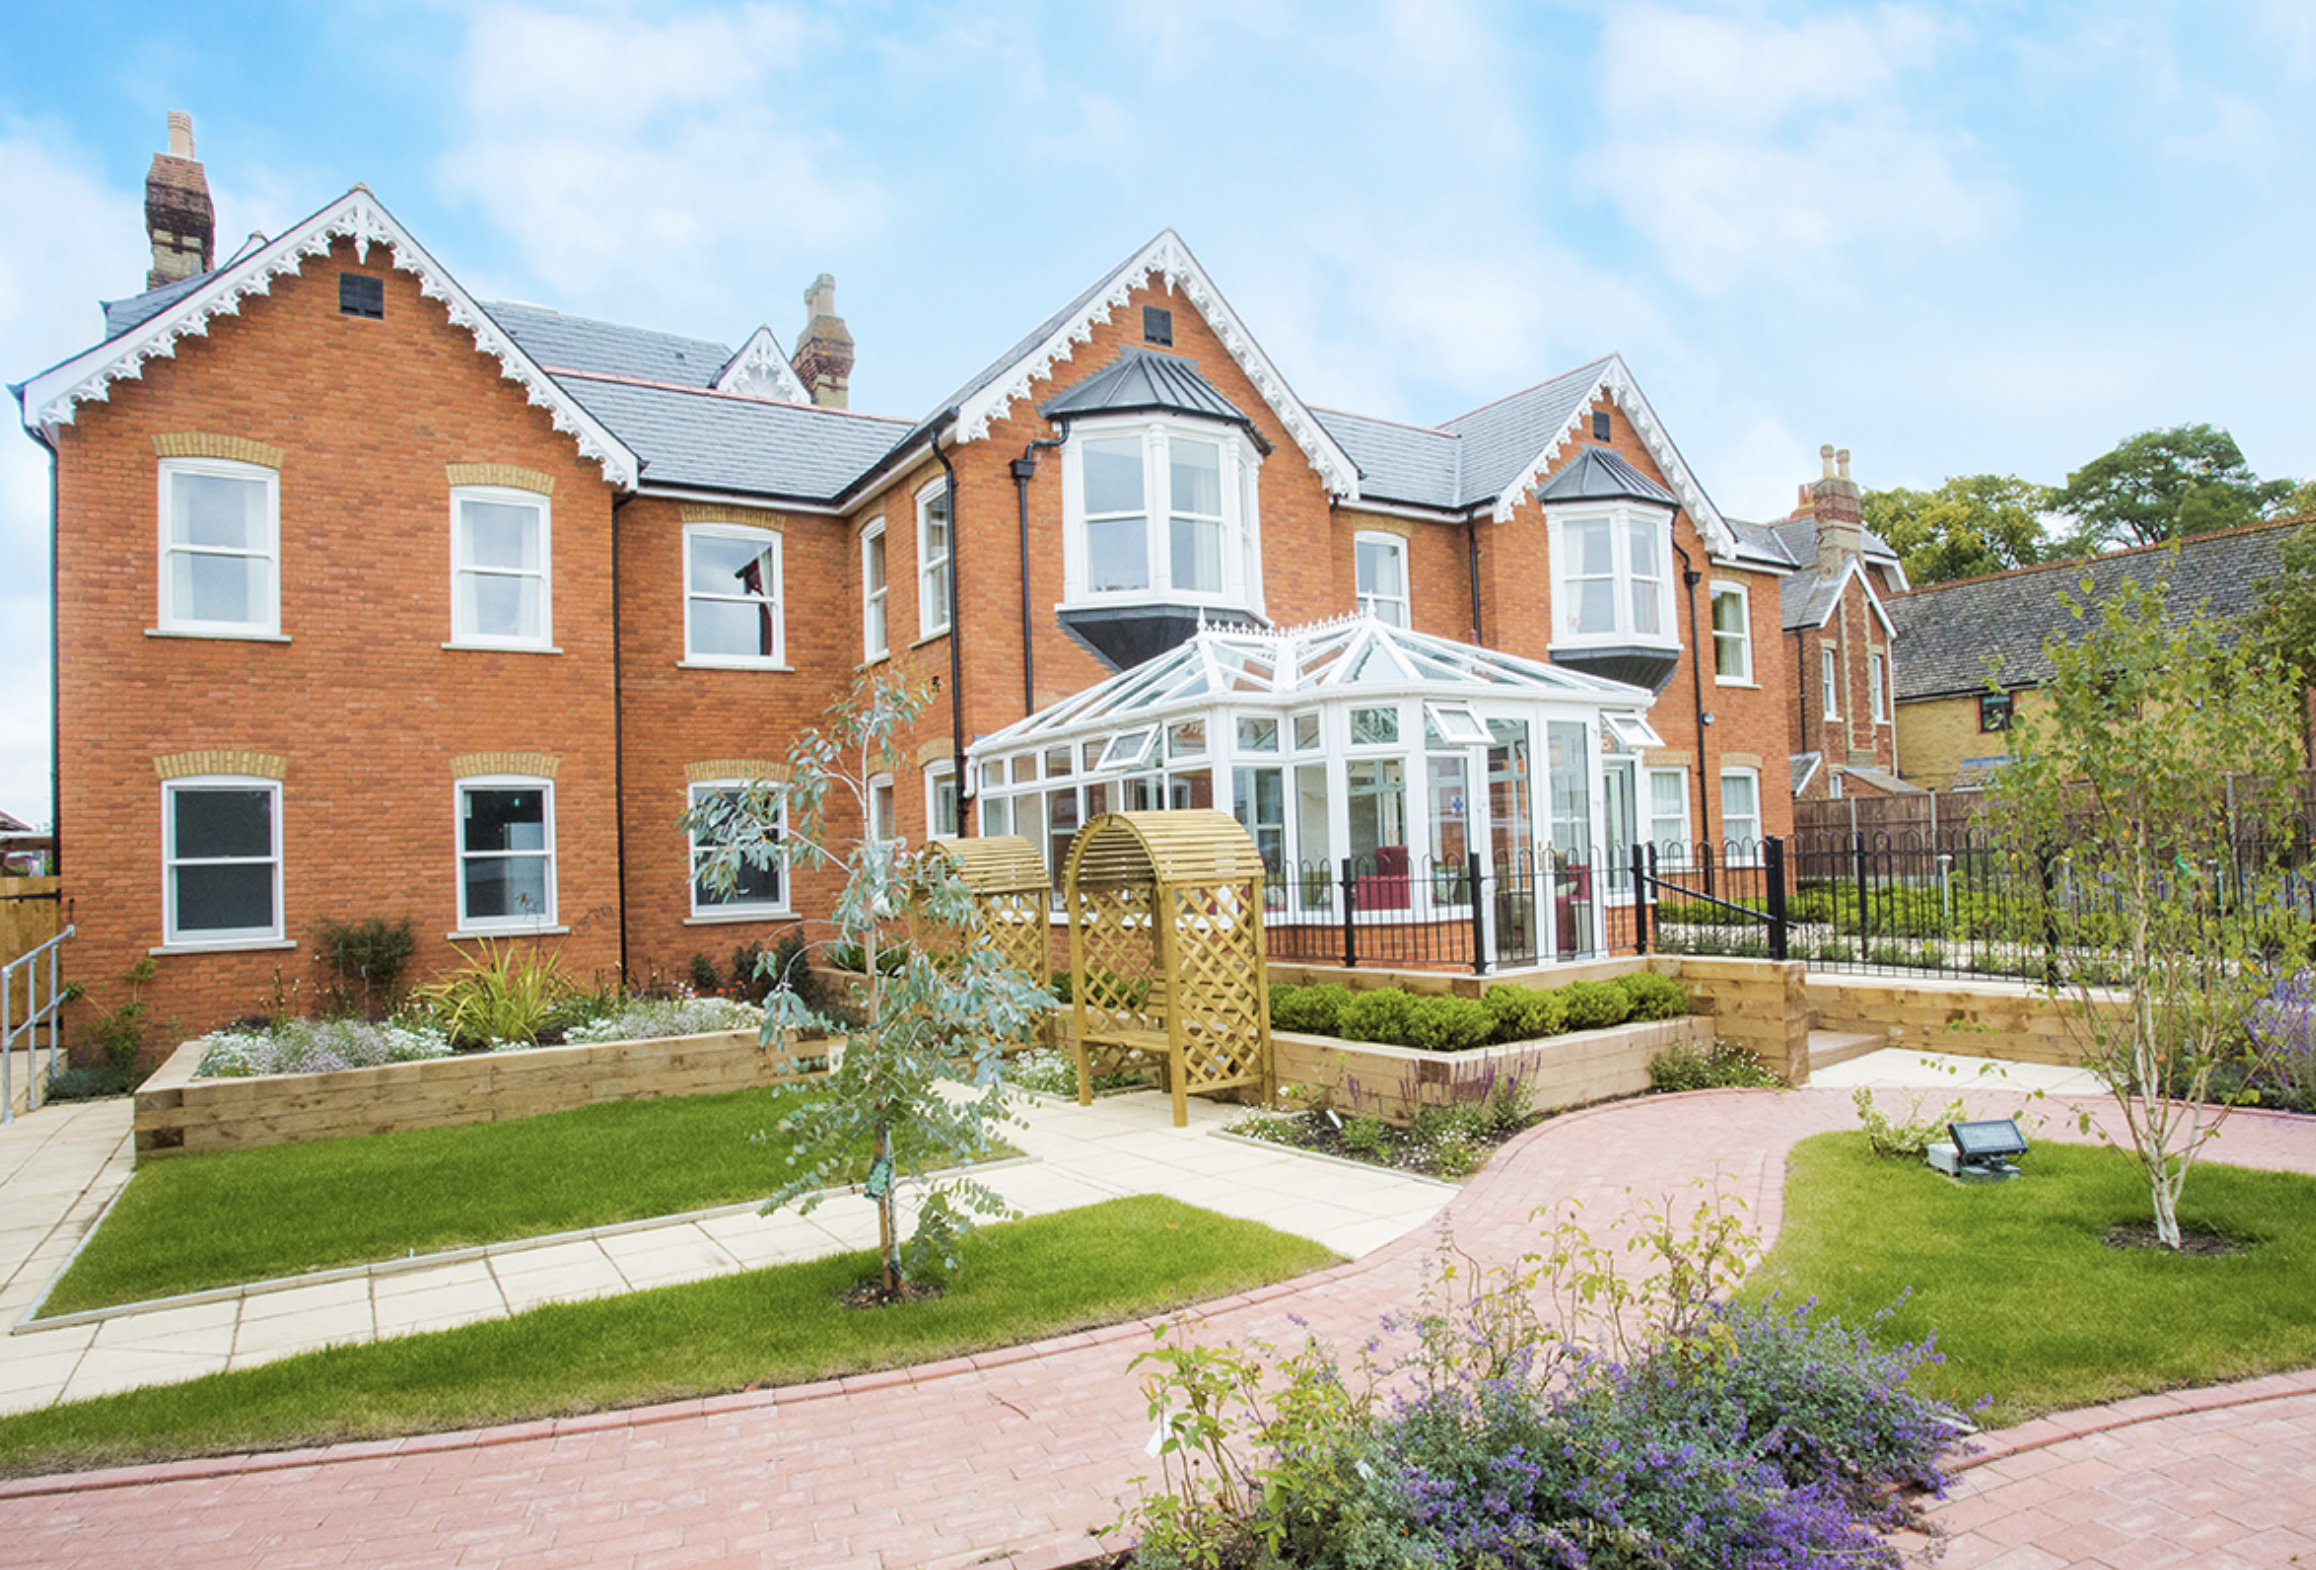 Exterior of Byron House care home in Aylesbury, Buckinghamshire